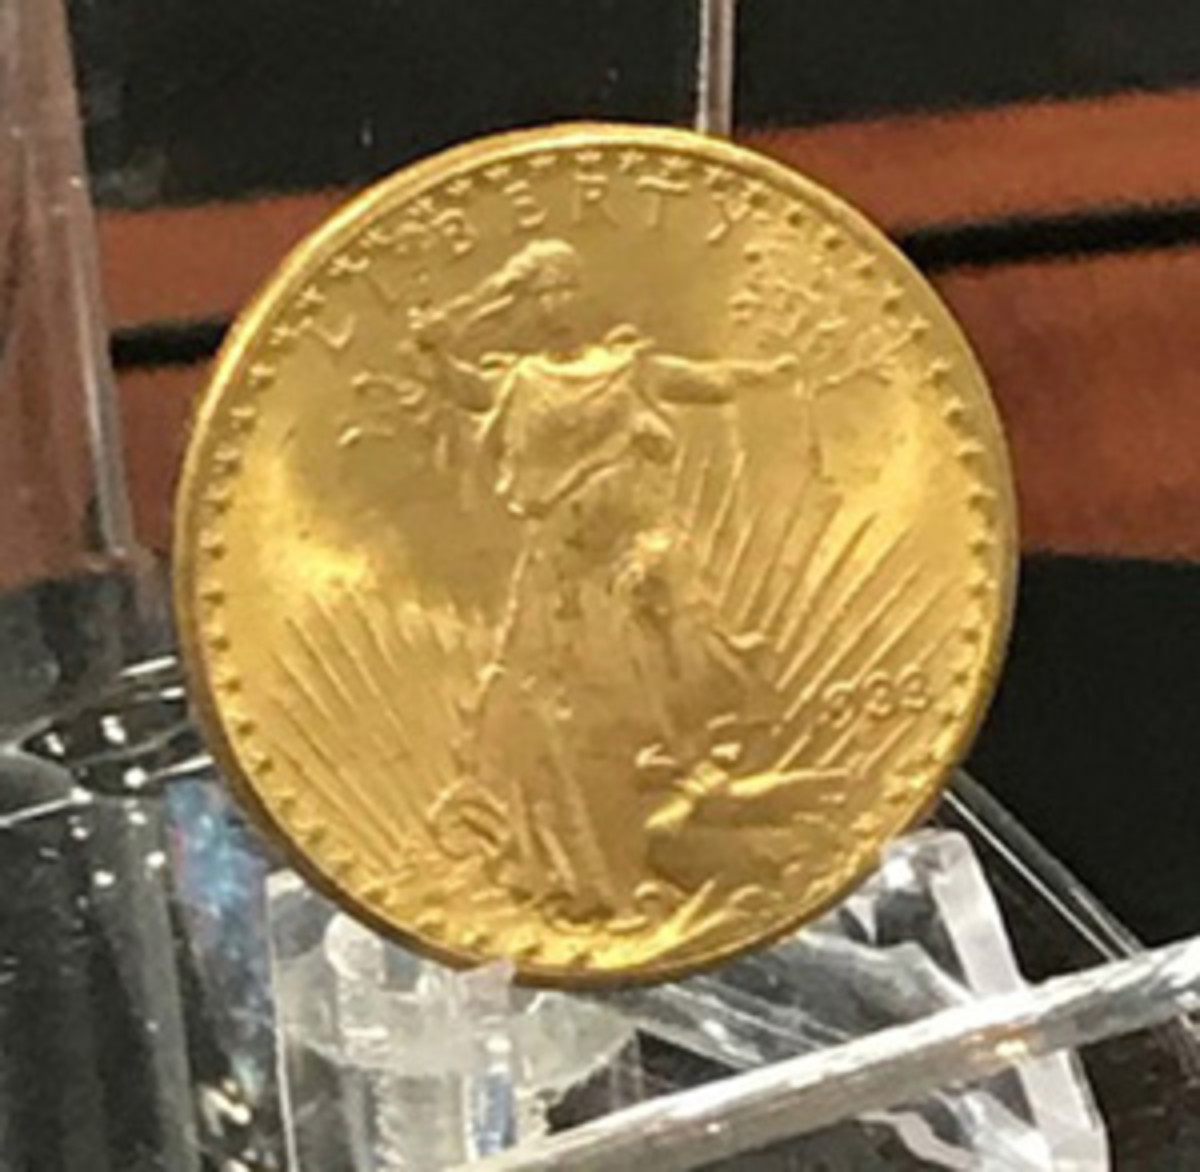  The story of the 1933 gold double eagle from the point of view of the Untied States Mint will be told May 10-11.